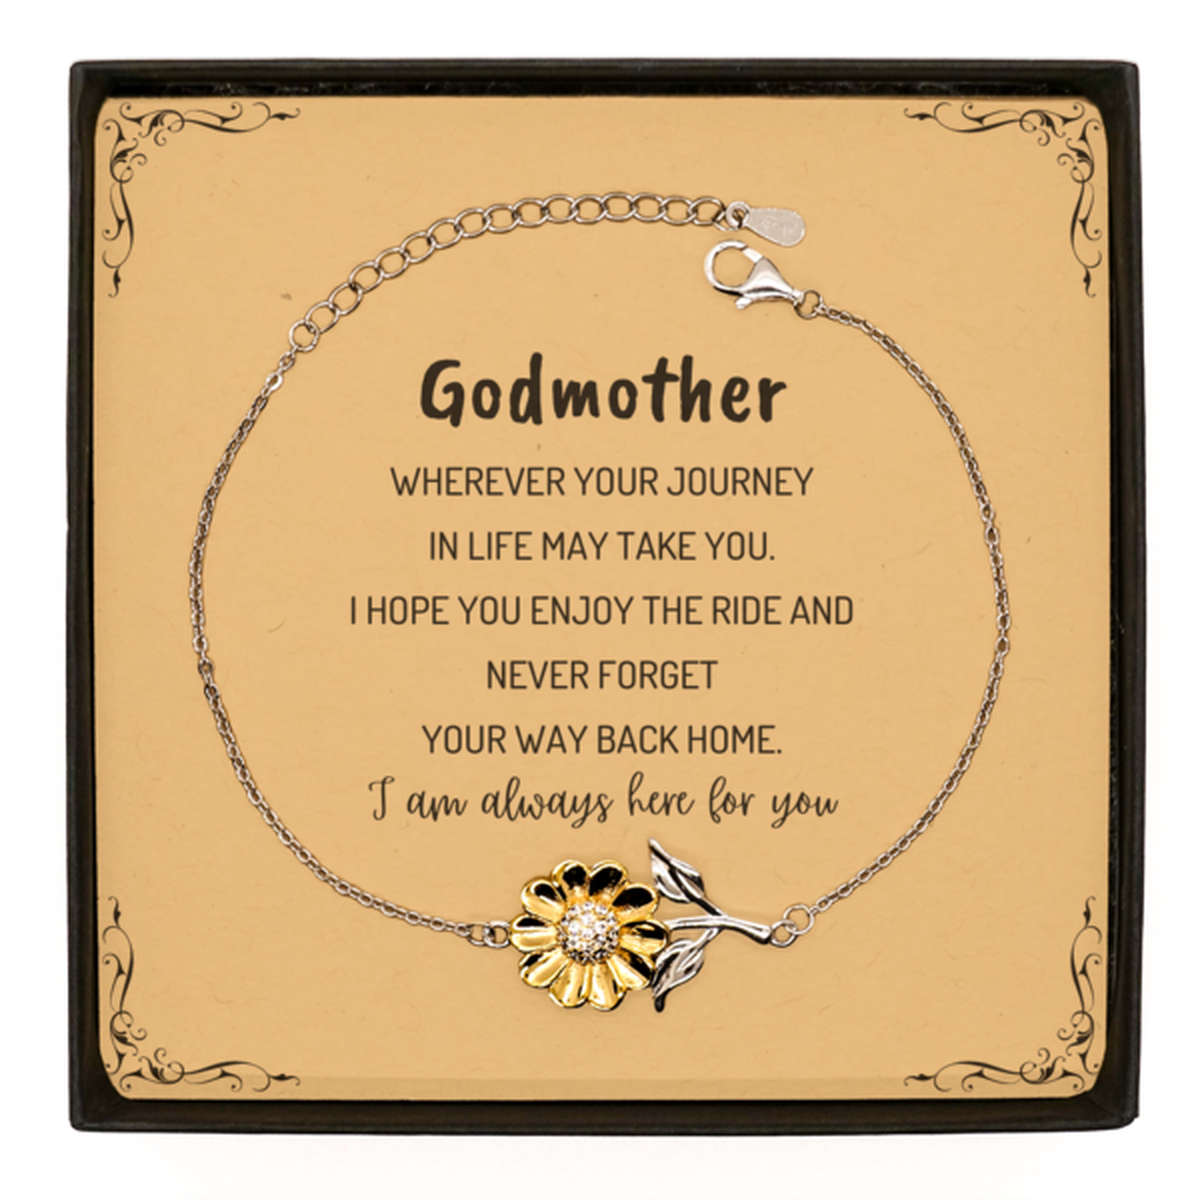 Godmother wherever your journey in life may take you, I am always here for you Godmother Sunflower Bracelet, Awesome Christmas Gifts For Godmother Message Card, Godmother Birthday Gifts for Men Women Family Loved One